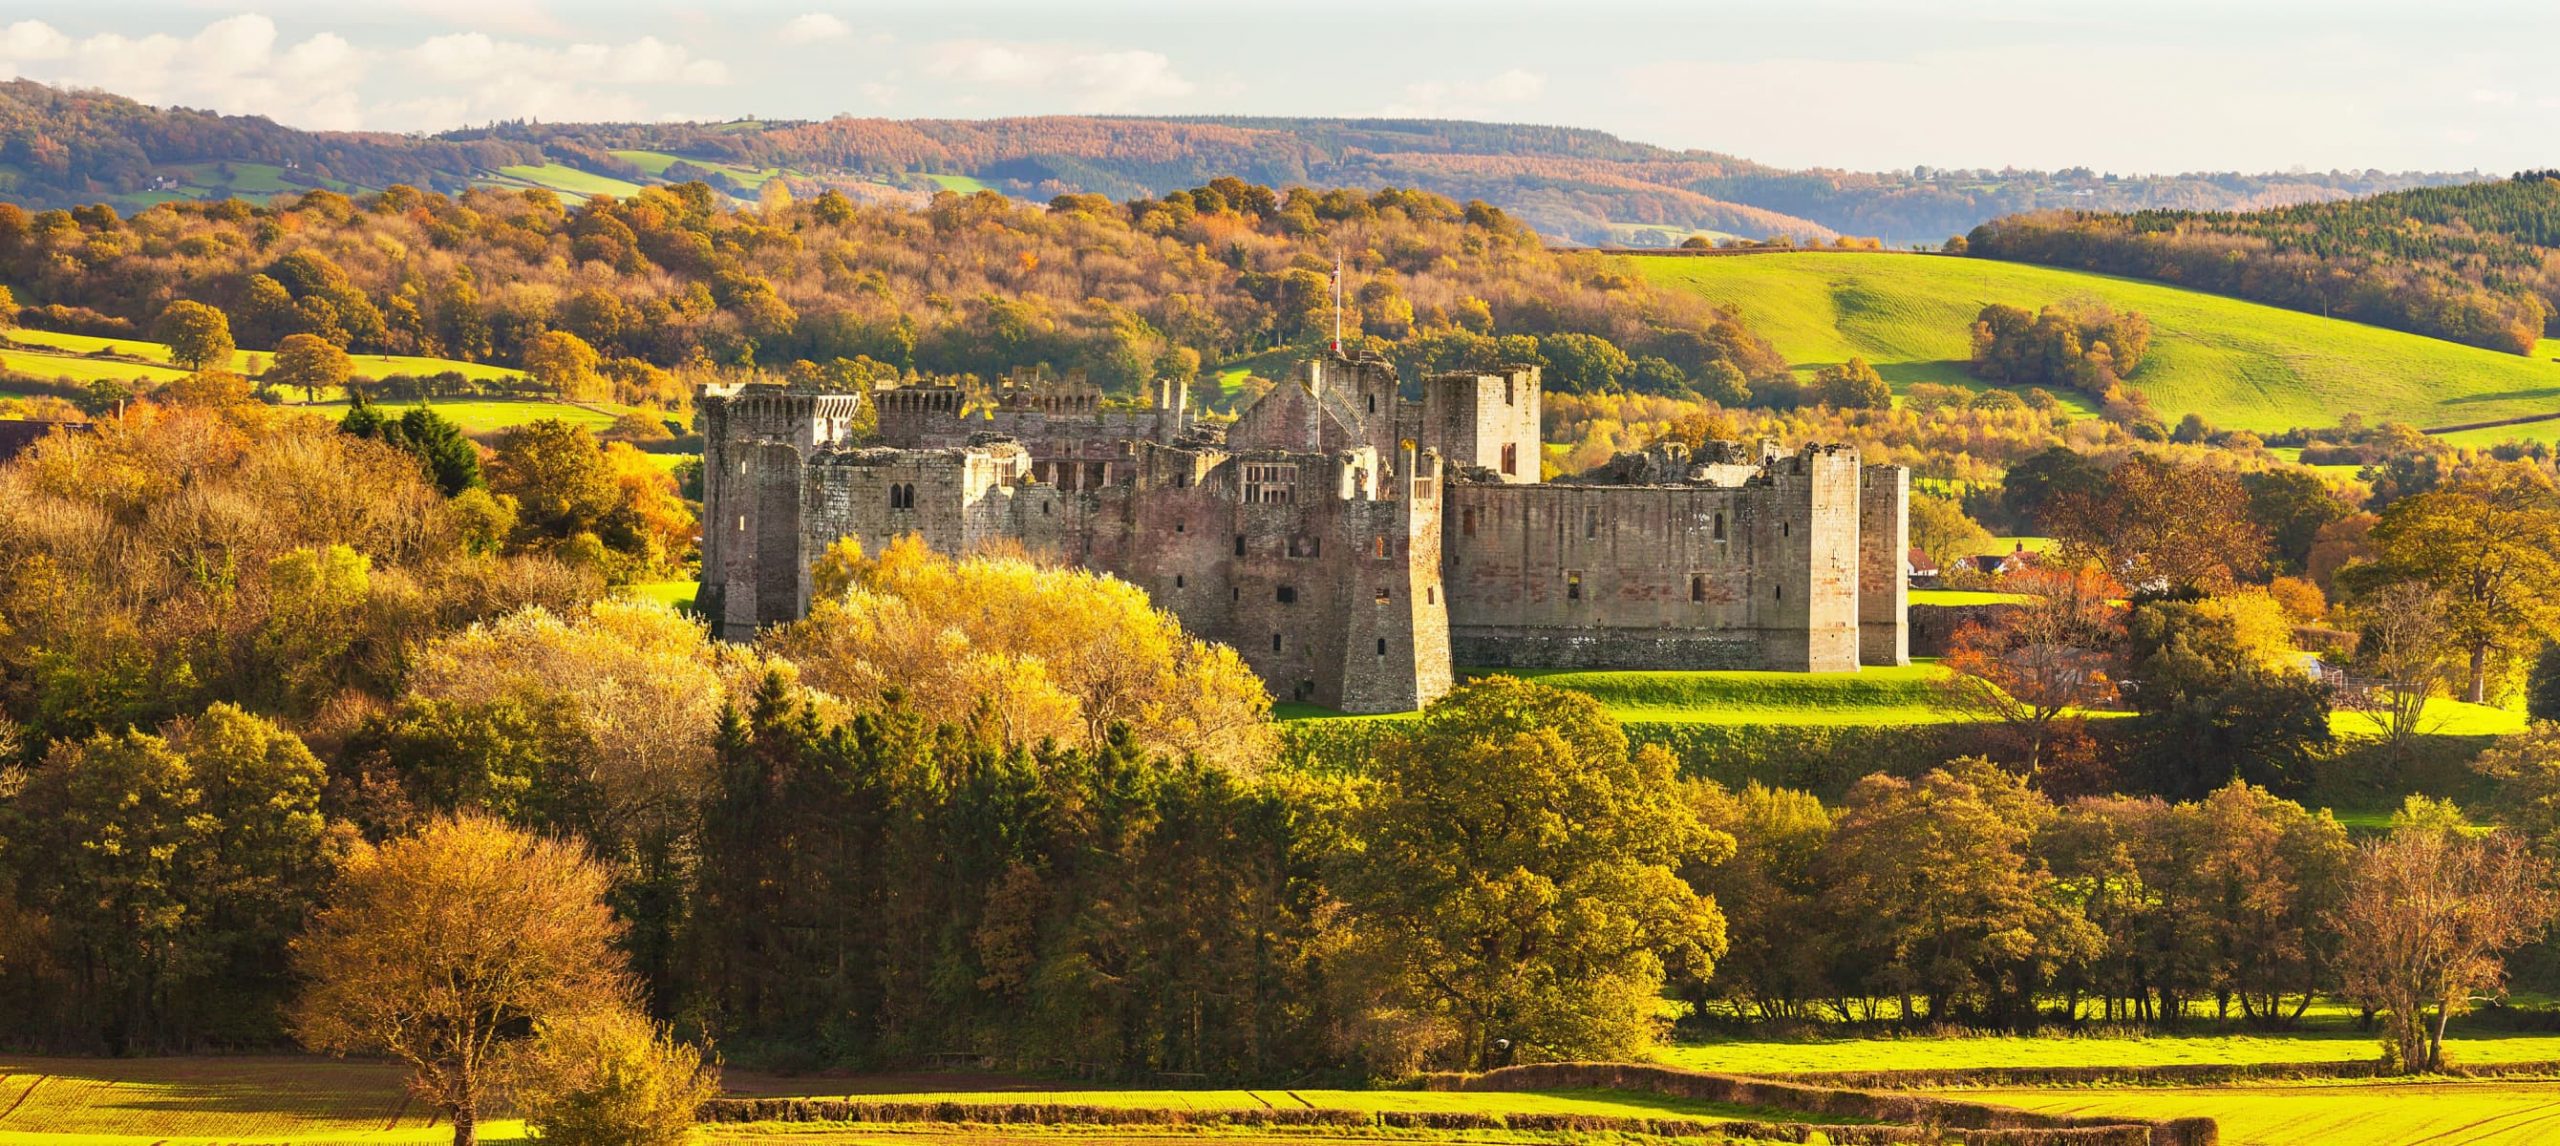 A Guide To The 23 Most Beautiful Castles in Wales